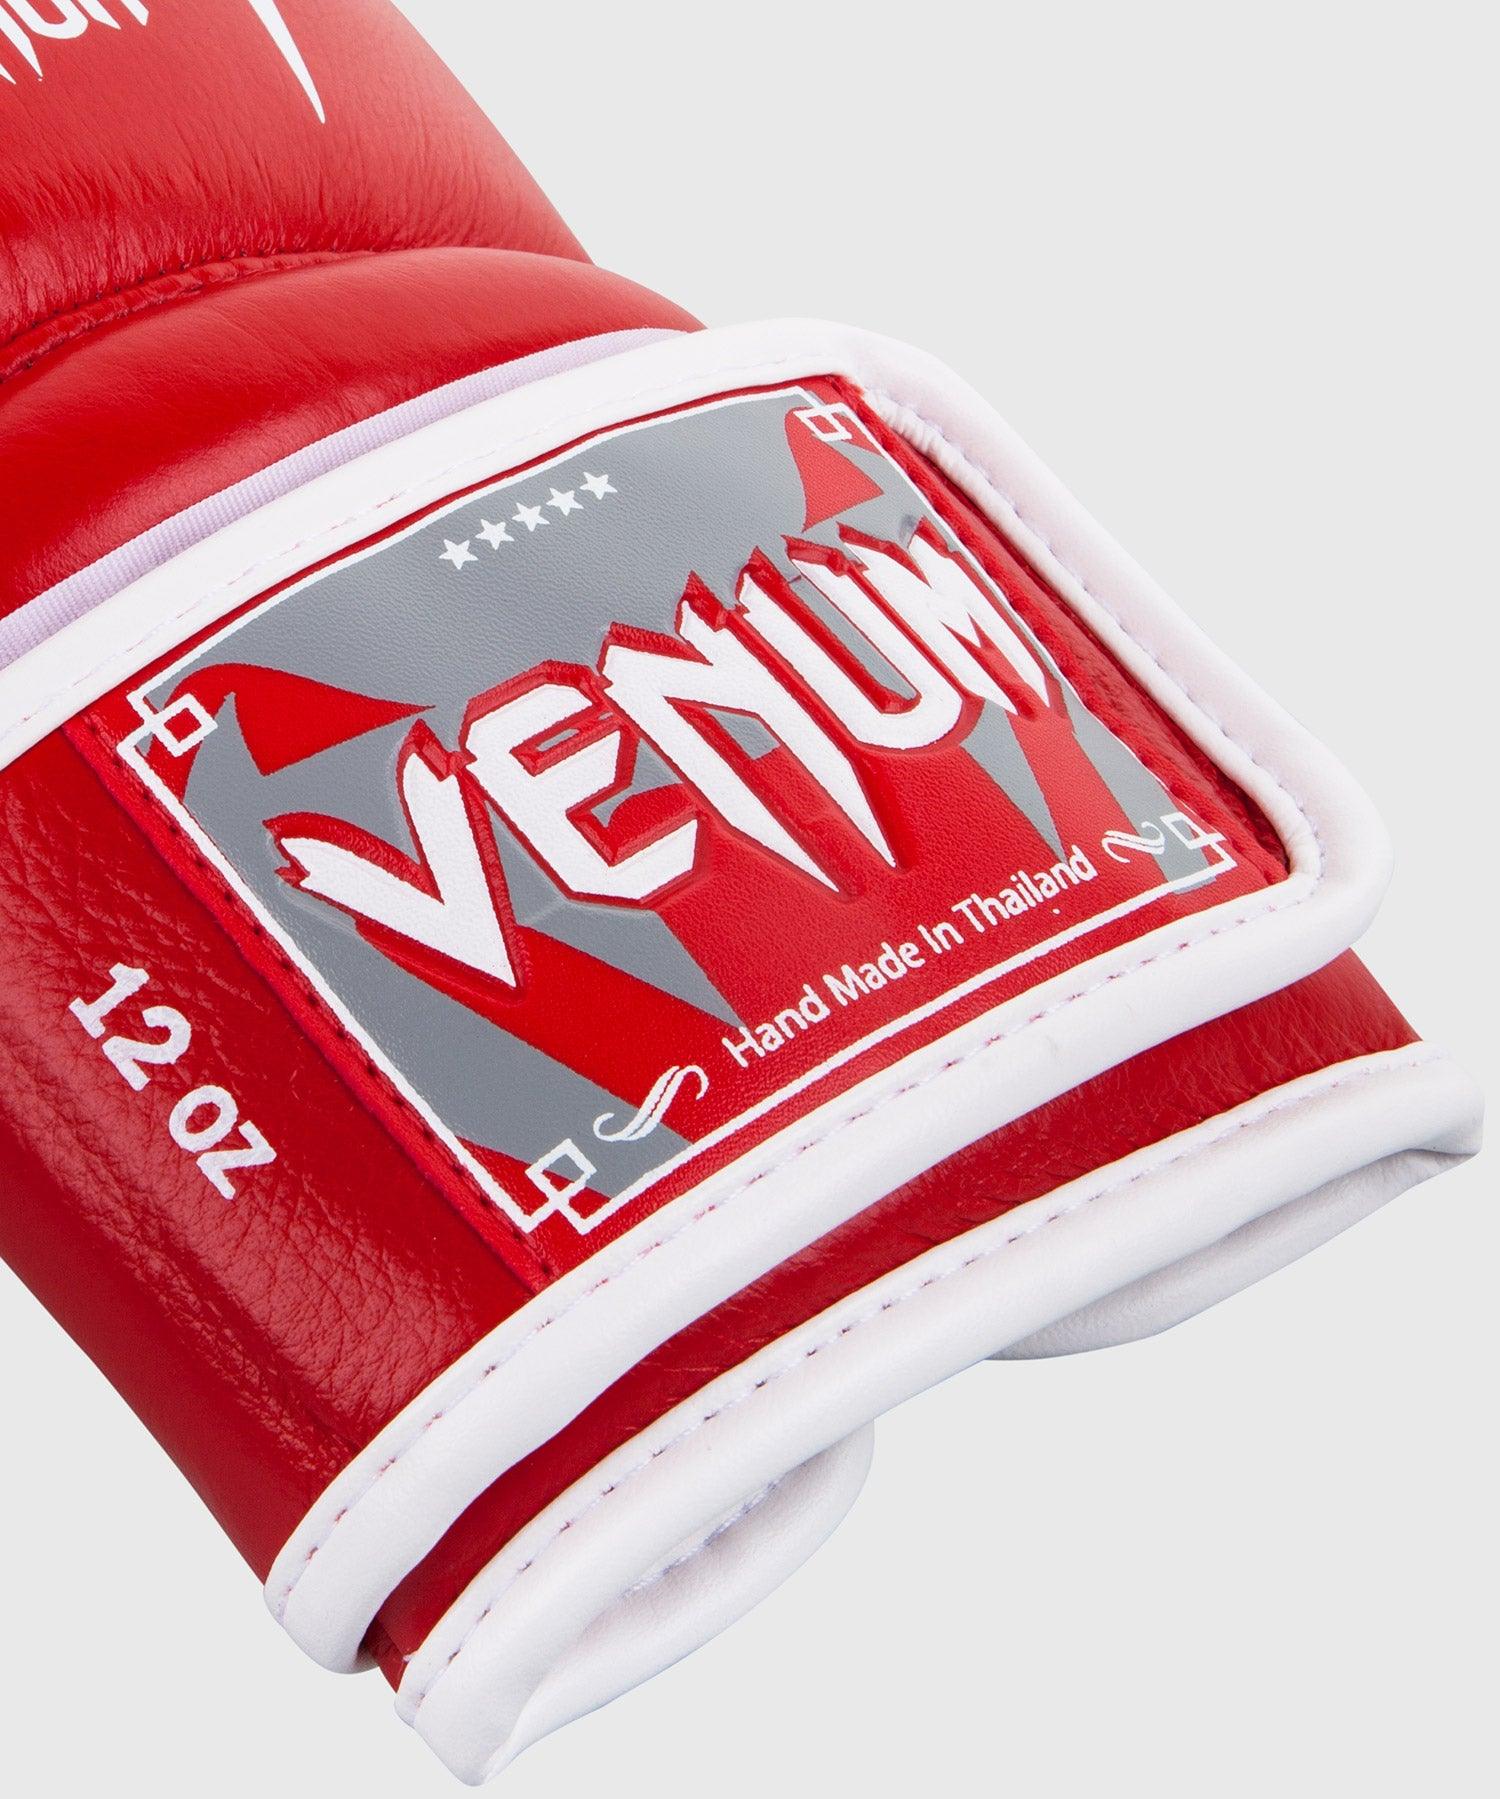 Venum Giant 3.0 Boxing Gloves - Nappa Leather - Red Picture 3